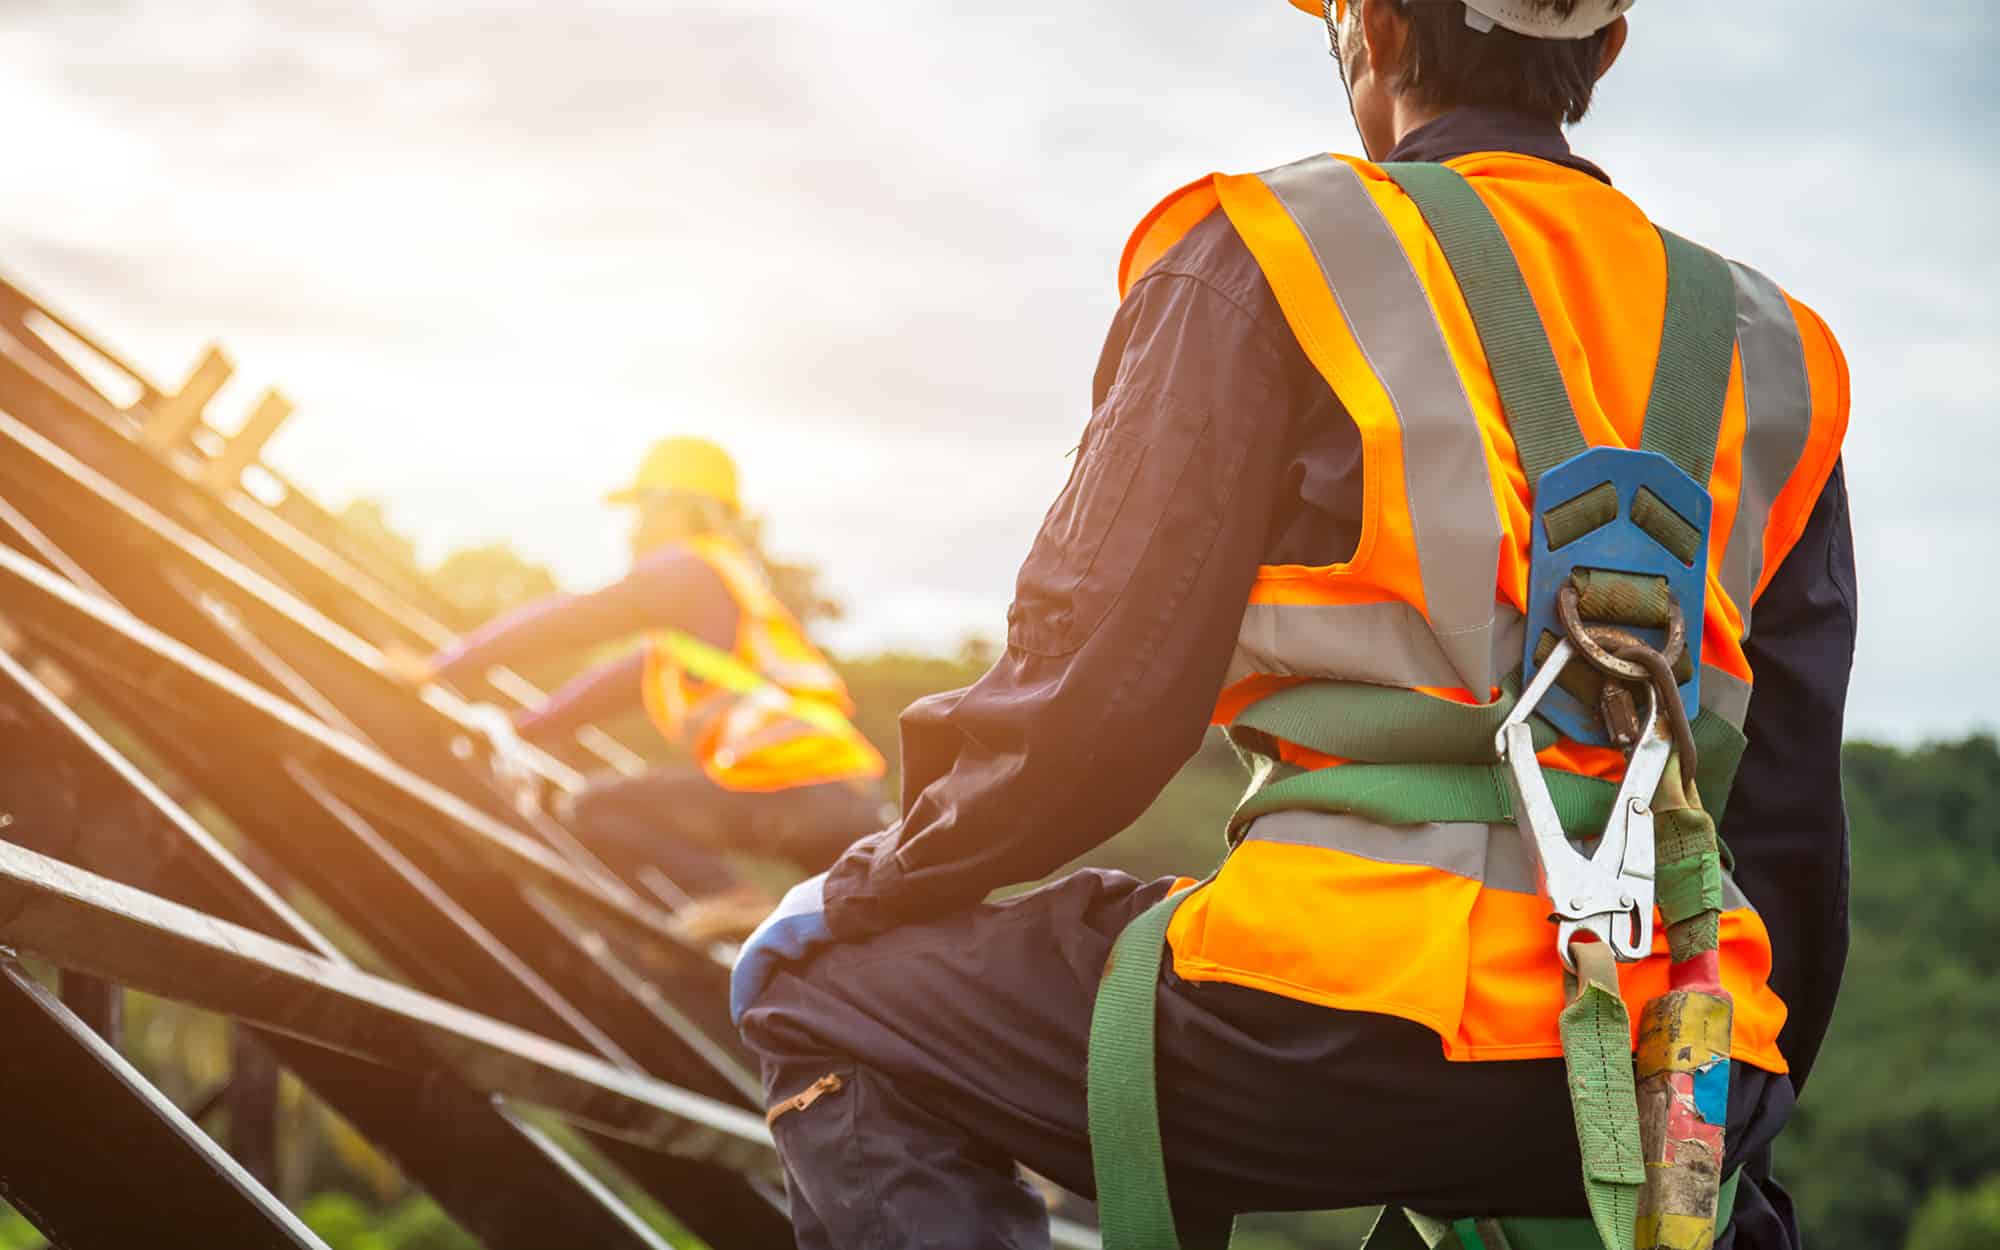 Must-Know Construction Safety Tips To Protect Everyone at Your Job Site